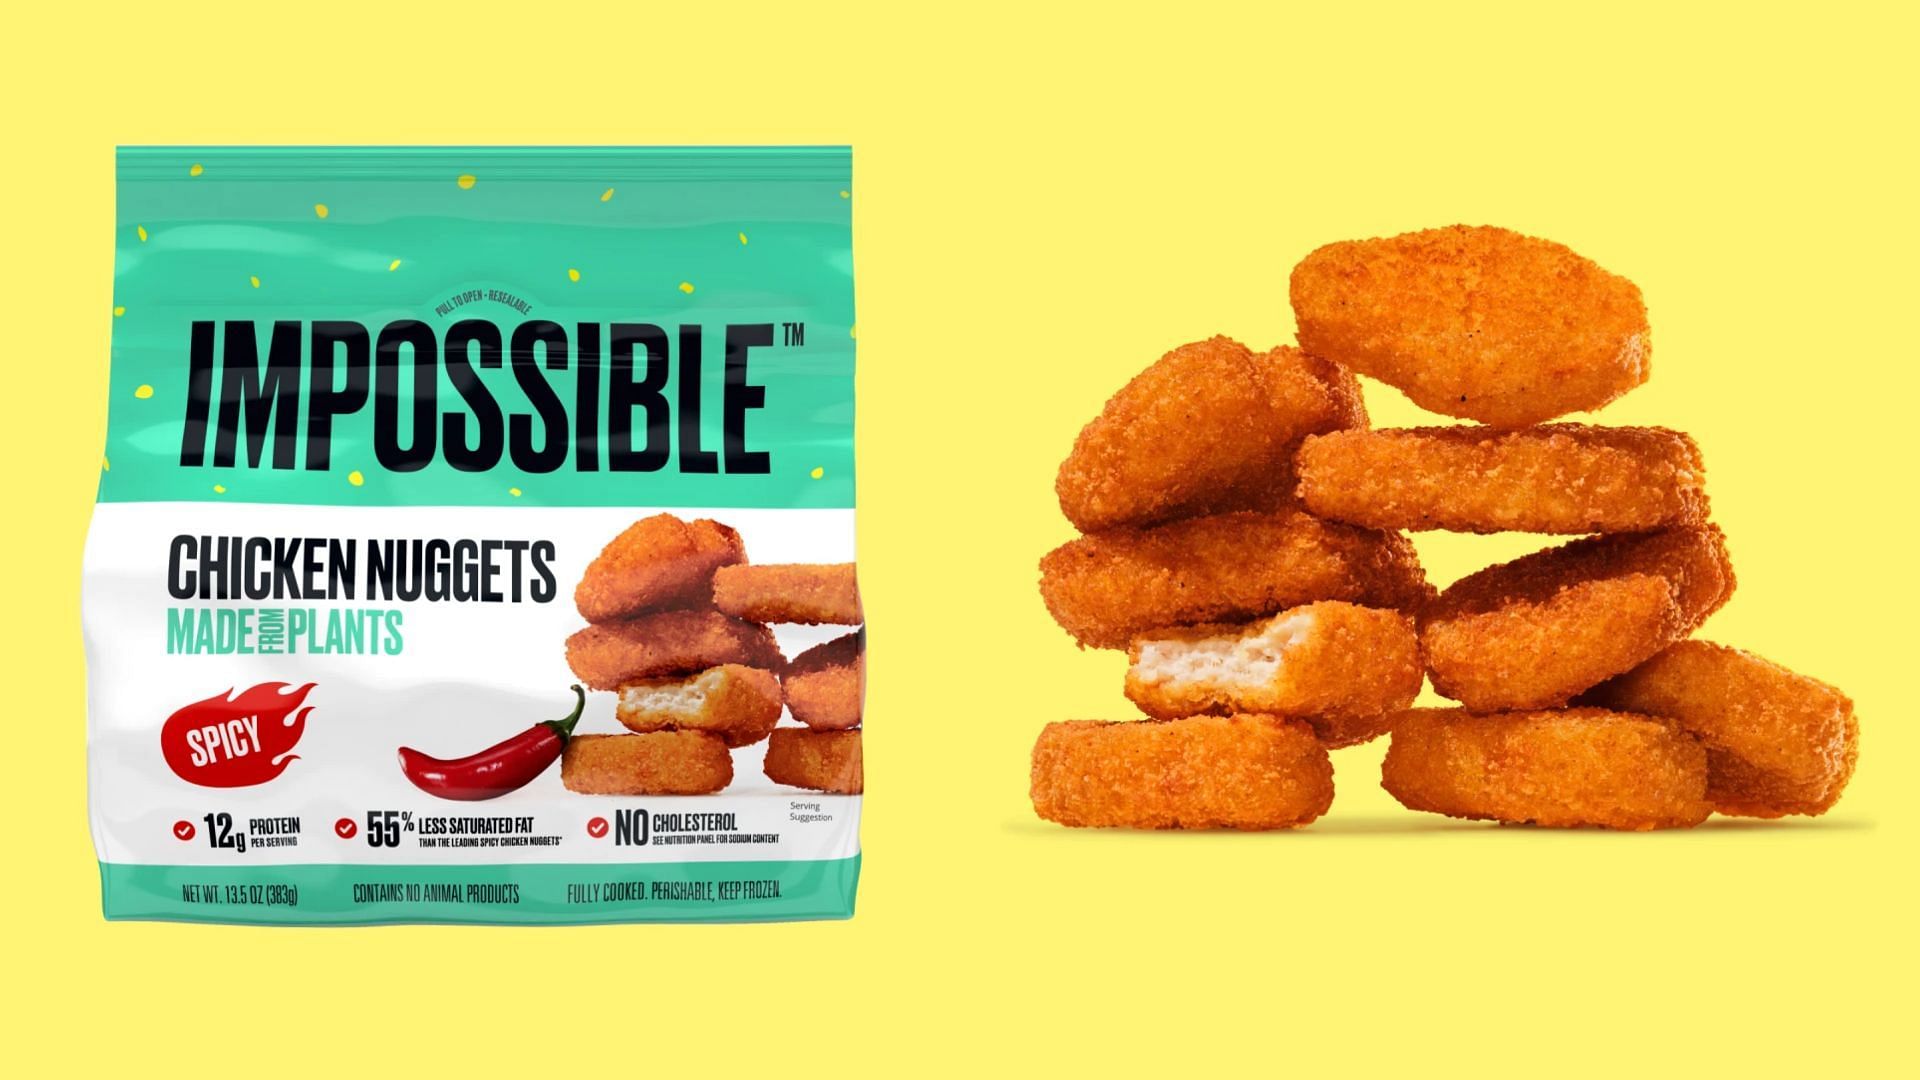 The new Impossible™ Spicy Chicken Nuggets (Image via Impossible Foods)